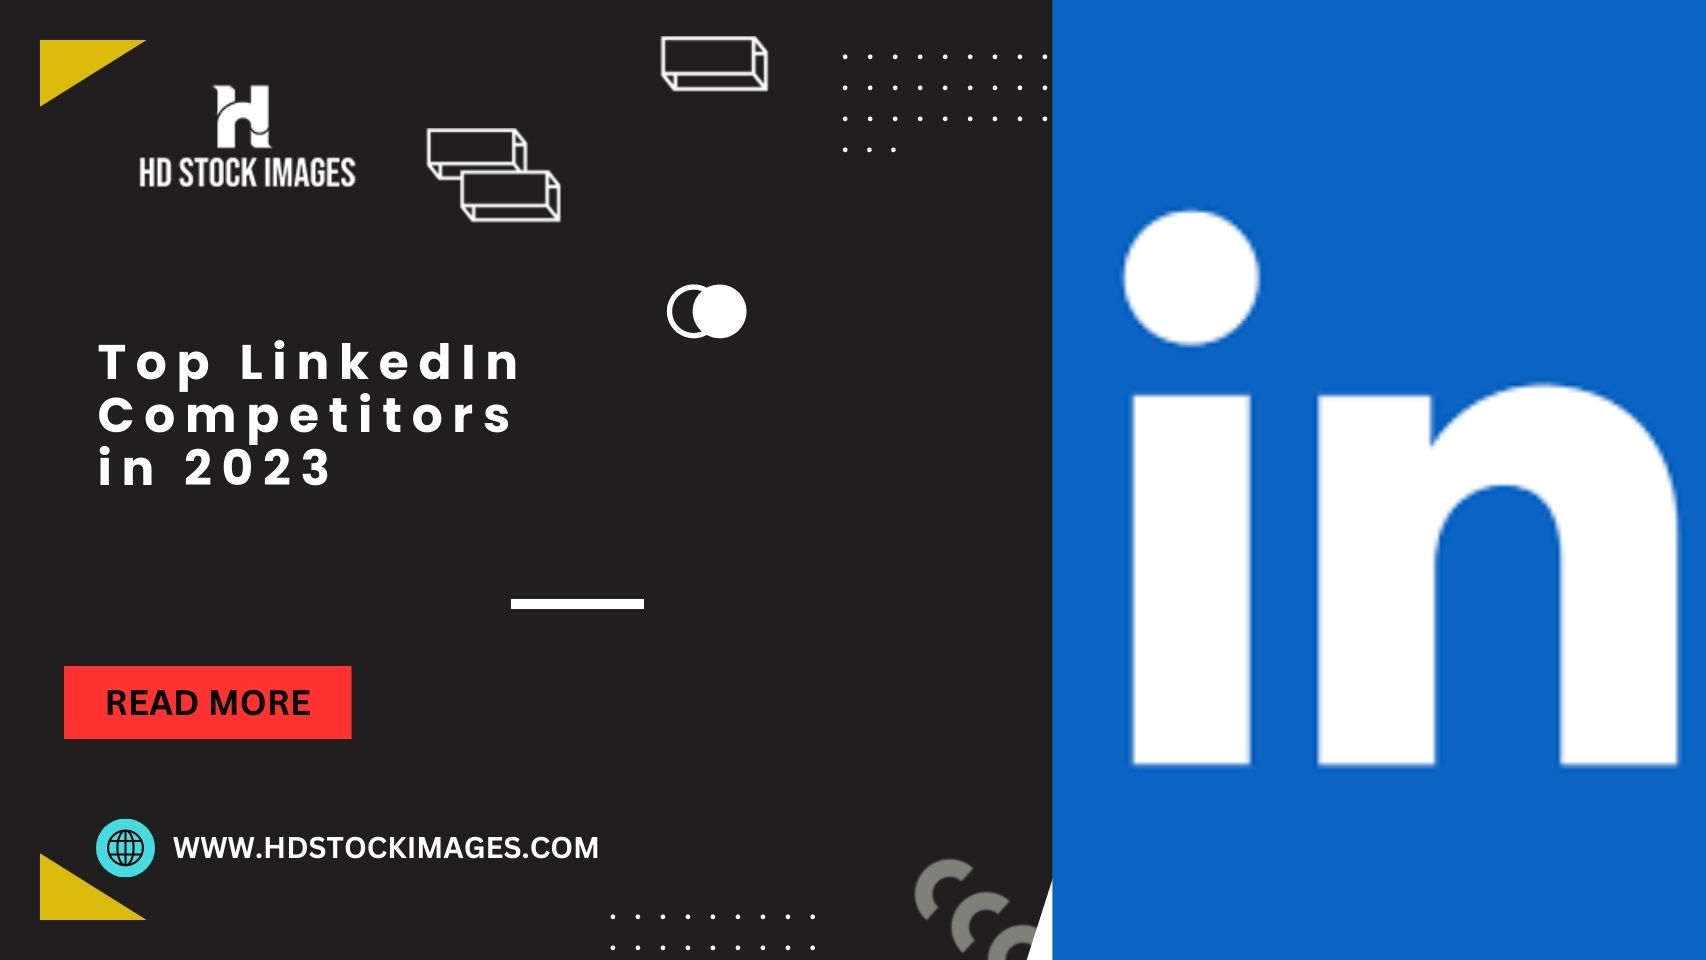 List of Top LinkedIn Competitors in 2023